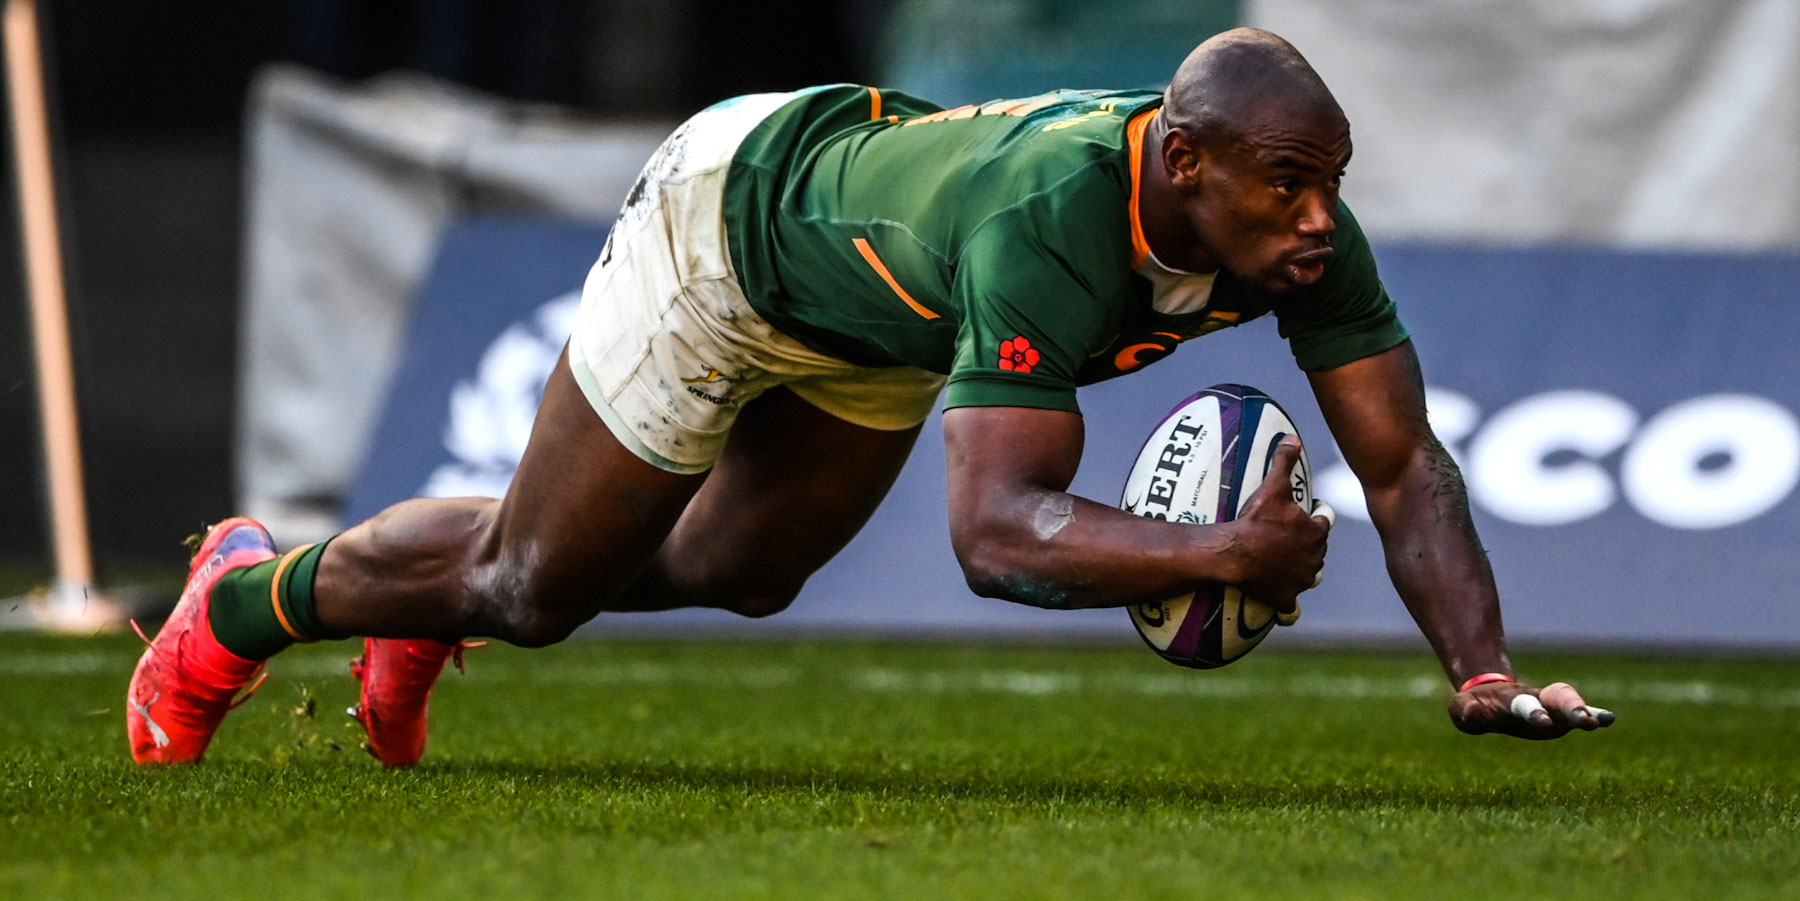 Makazole Mapimpi goes over for one of his two tries.